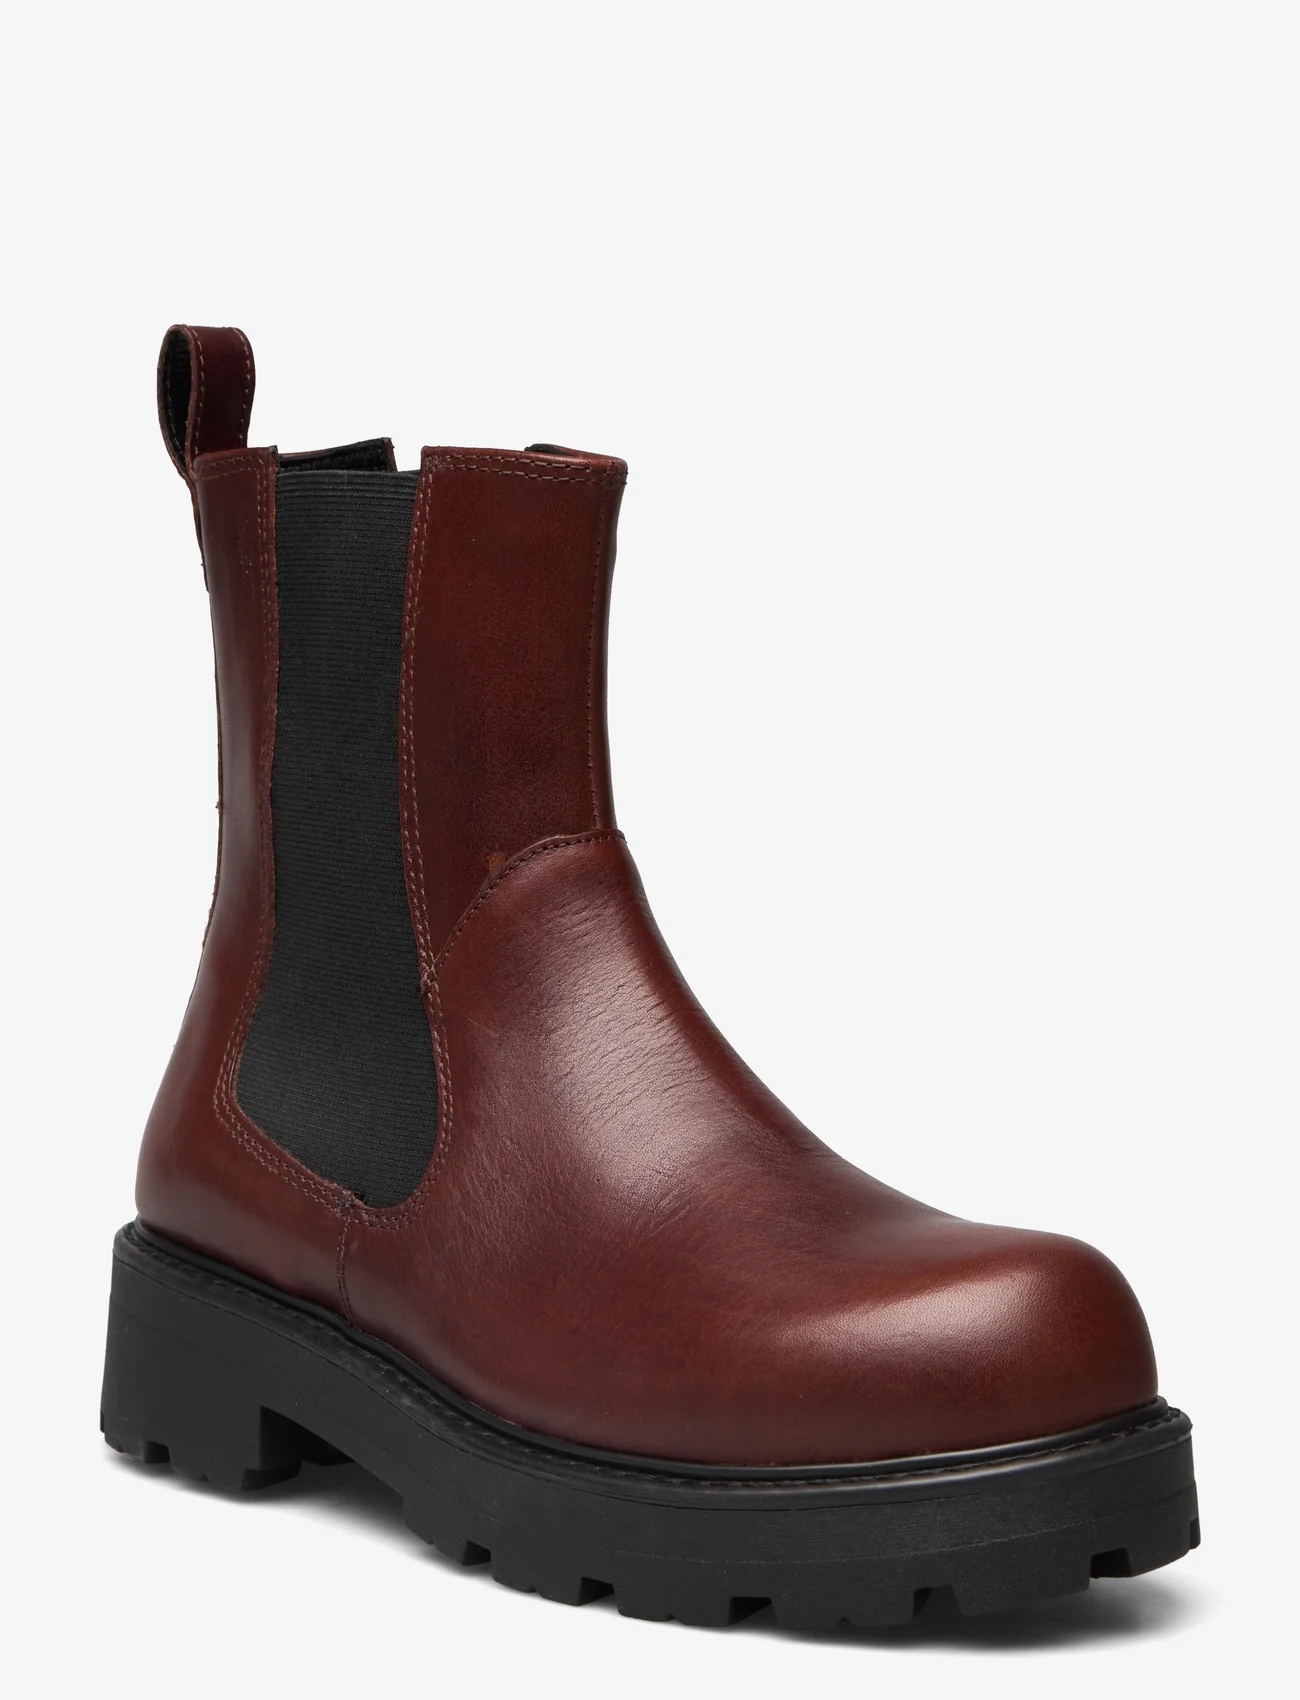 VAGABOND - COSMO 2.0 - chelsea boots - brown - 0